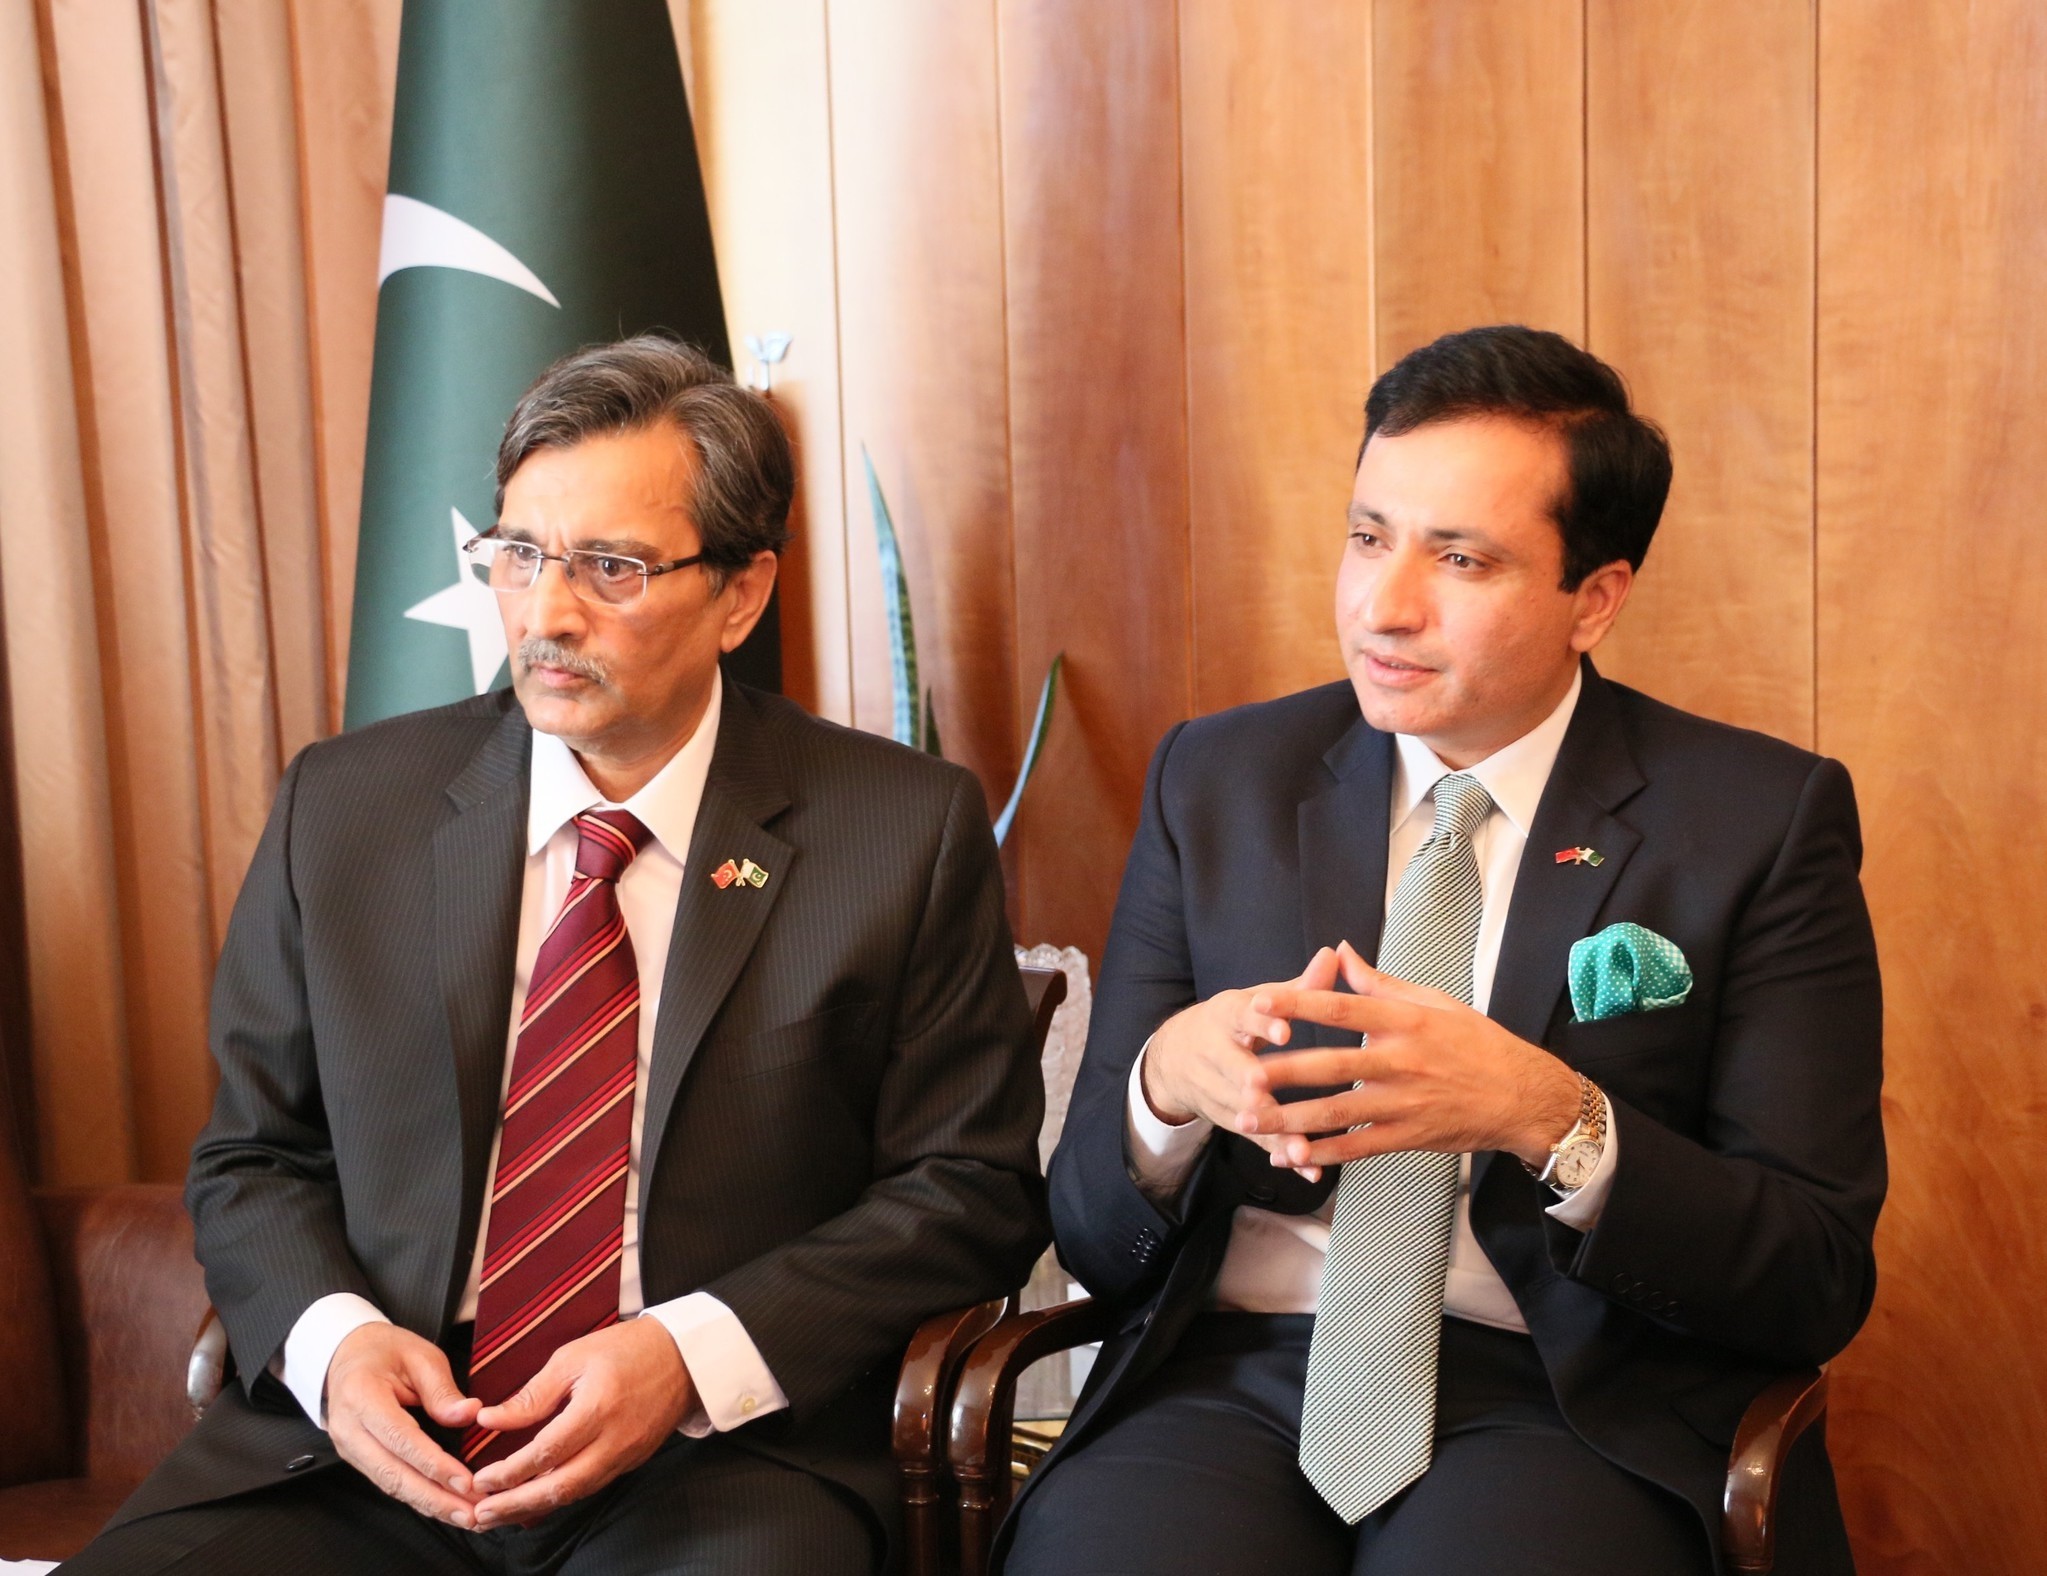 Special Envoys of the Prime Minister of Islamic Republic of Pakistan and members of Pakistanu2019s National Assembly Mohammad Pervaiz Malik and Mohsin Shah Nawaz Ranjha.